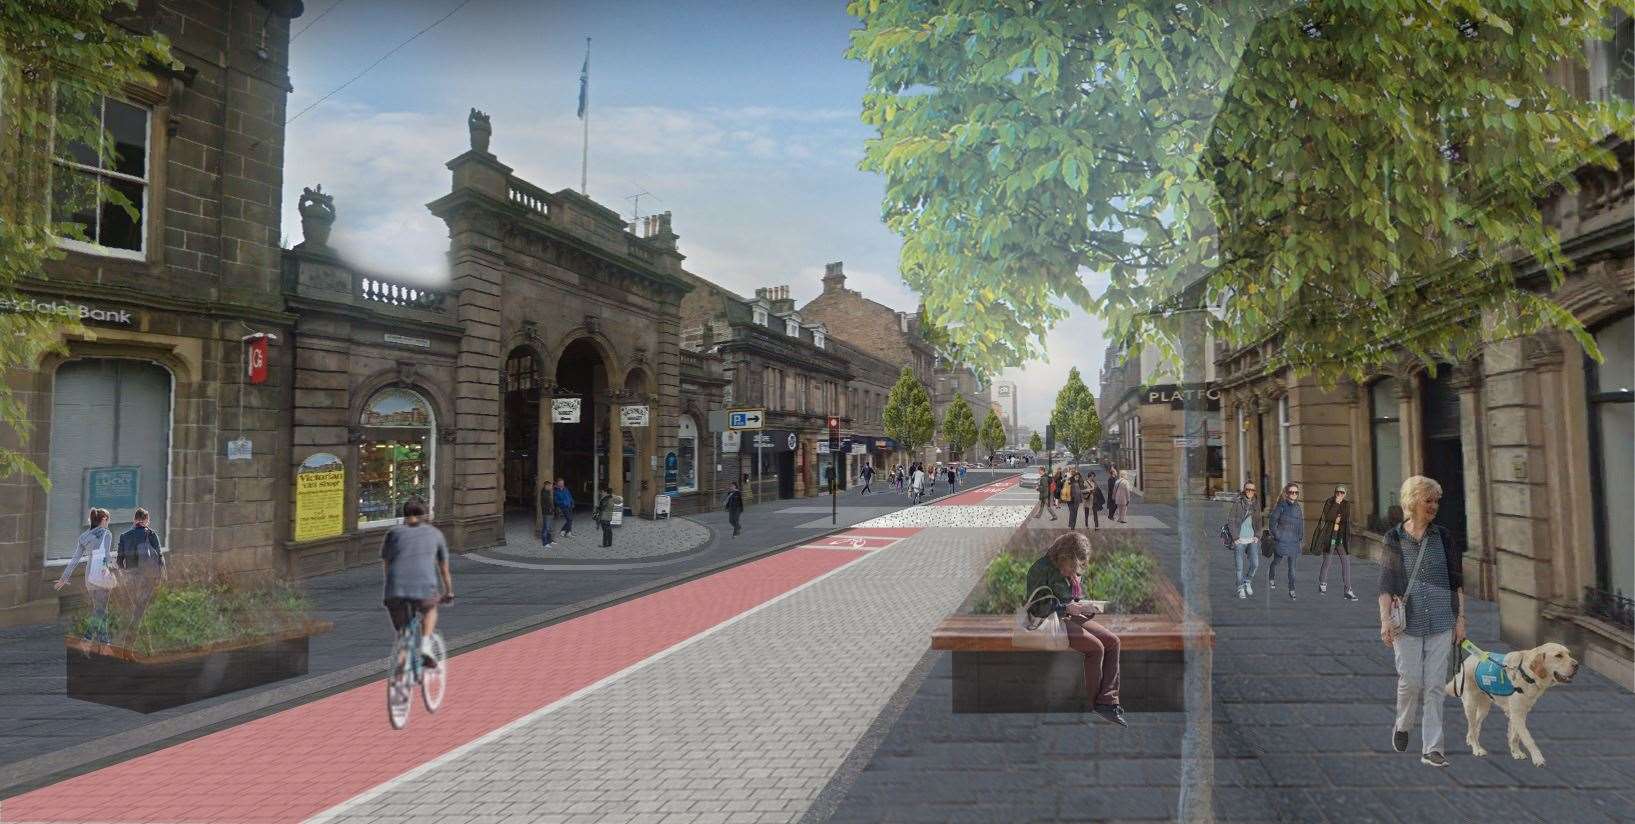 An artist's impression of how the latest proposals for Academy Street could look.